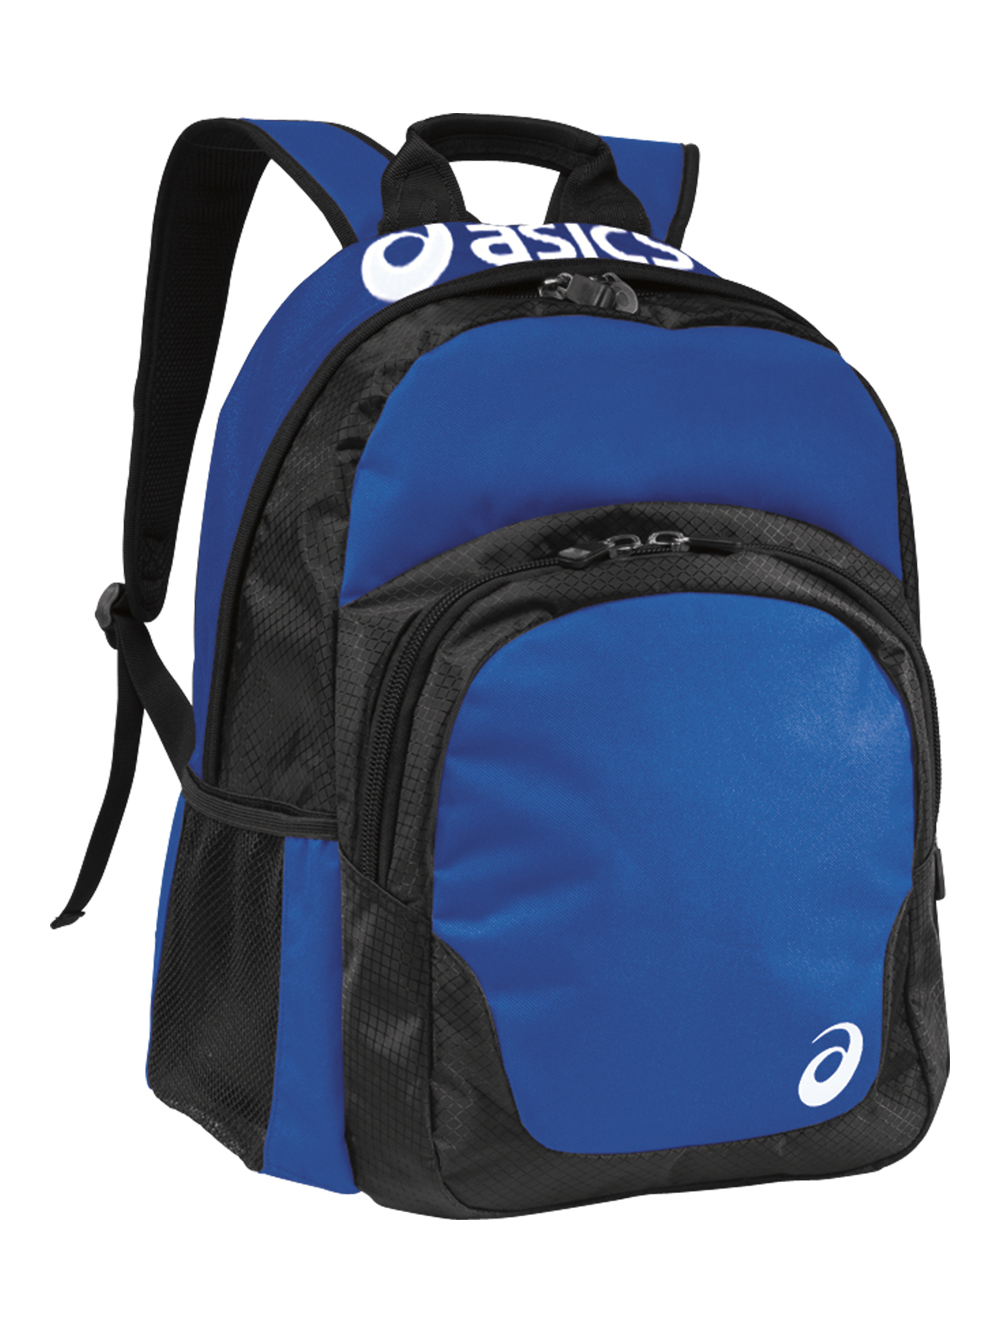 Asics Team Backpack | Midwest 